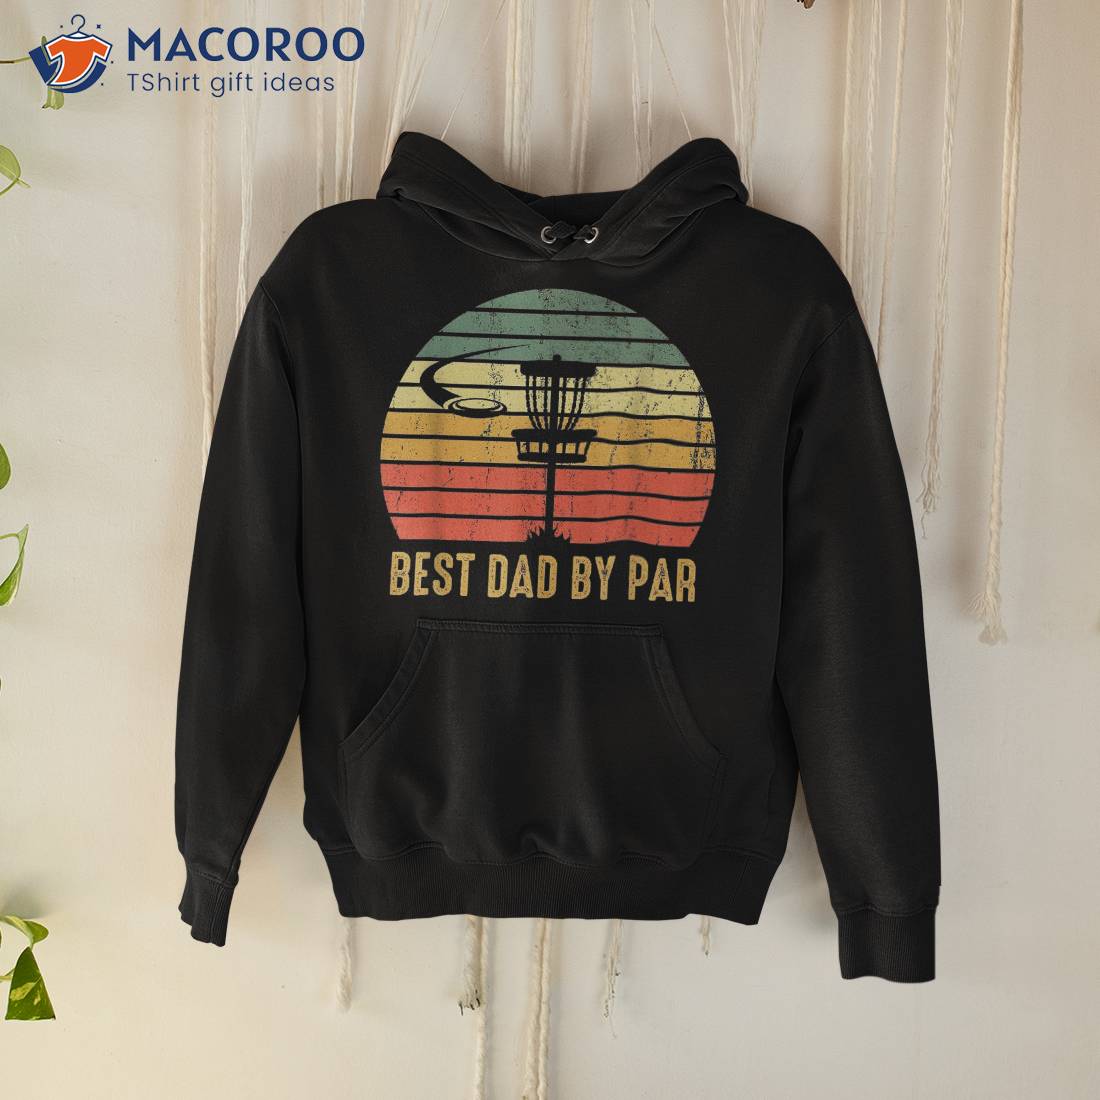 https://images.macoroo.com/wp-content/uploads/2023/06/best-dad-by-par-funny-disc-golf-gifts-vintage-father-s-day-shirt-hoodie.jpg